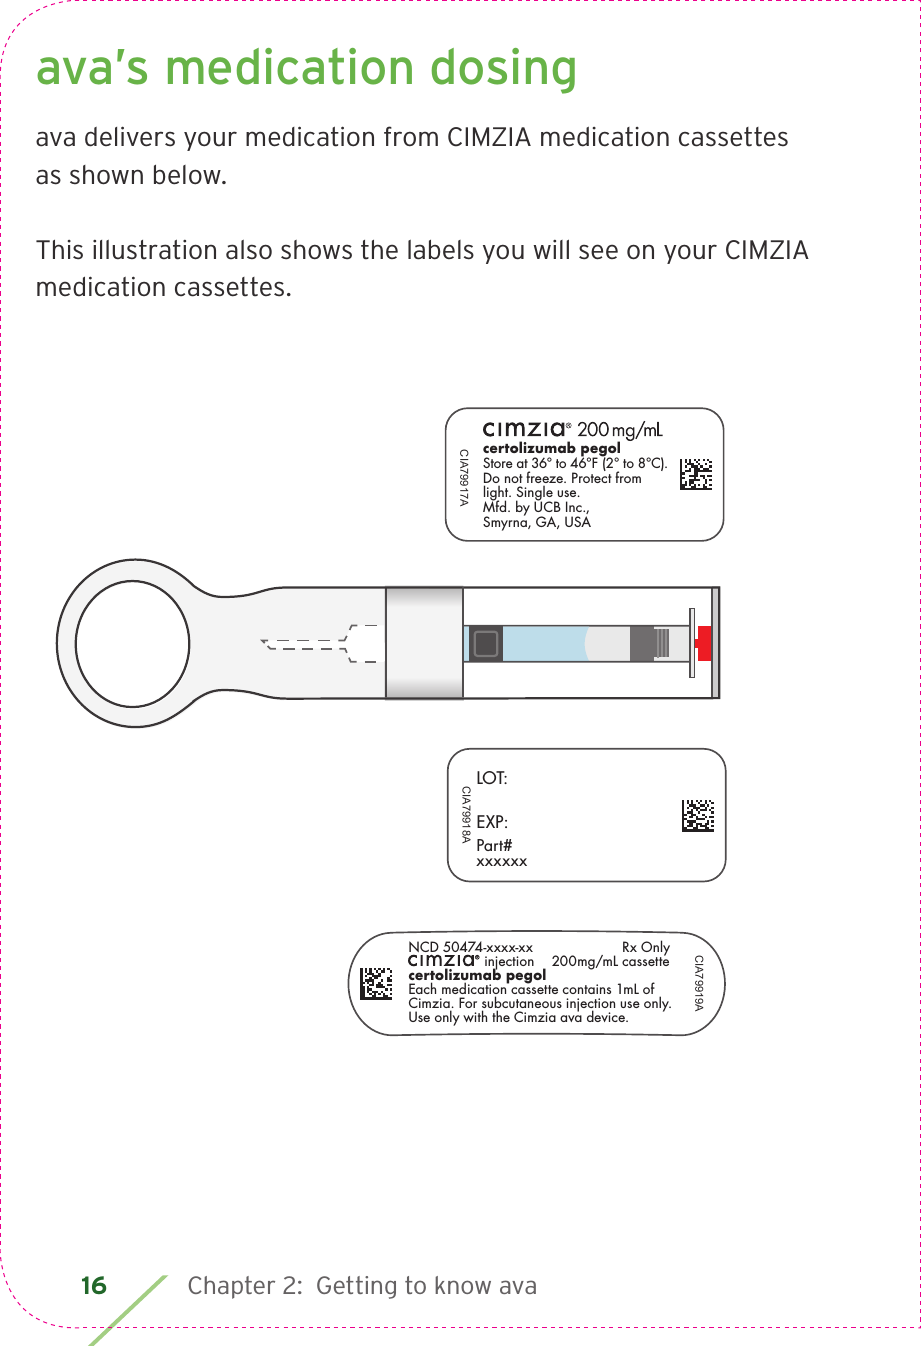 16 Chapter 2:  Getting to know avaava’s medication dosingava delivers your medication from CIMZIA medication cassettes as shown below. This illustration also shows the labels you will see on your CIMZIA medication cassettes.LOT: EXP:Part# xxxxxxCIA79918Acertolizumab pegolStore at 36° to 46°F (2° to 8°C).Do not freeze. Protect from light. Single use.Mfd. by UCB Inc., Smyrna, GA, USACIA79917ACIA79919ANCD 50474-xxxx-xx  Rx Onlyinjection  200mg/mL cassettecertolizumab pegolEach medication cassette contains 1mL of Cimzia. For subcutaneous injection use only. Use only with the Cimzia ava device. 